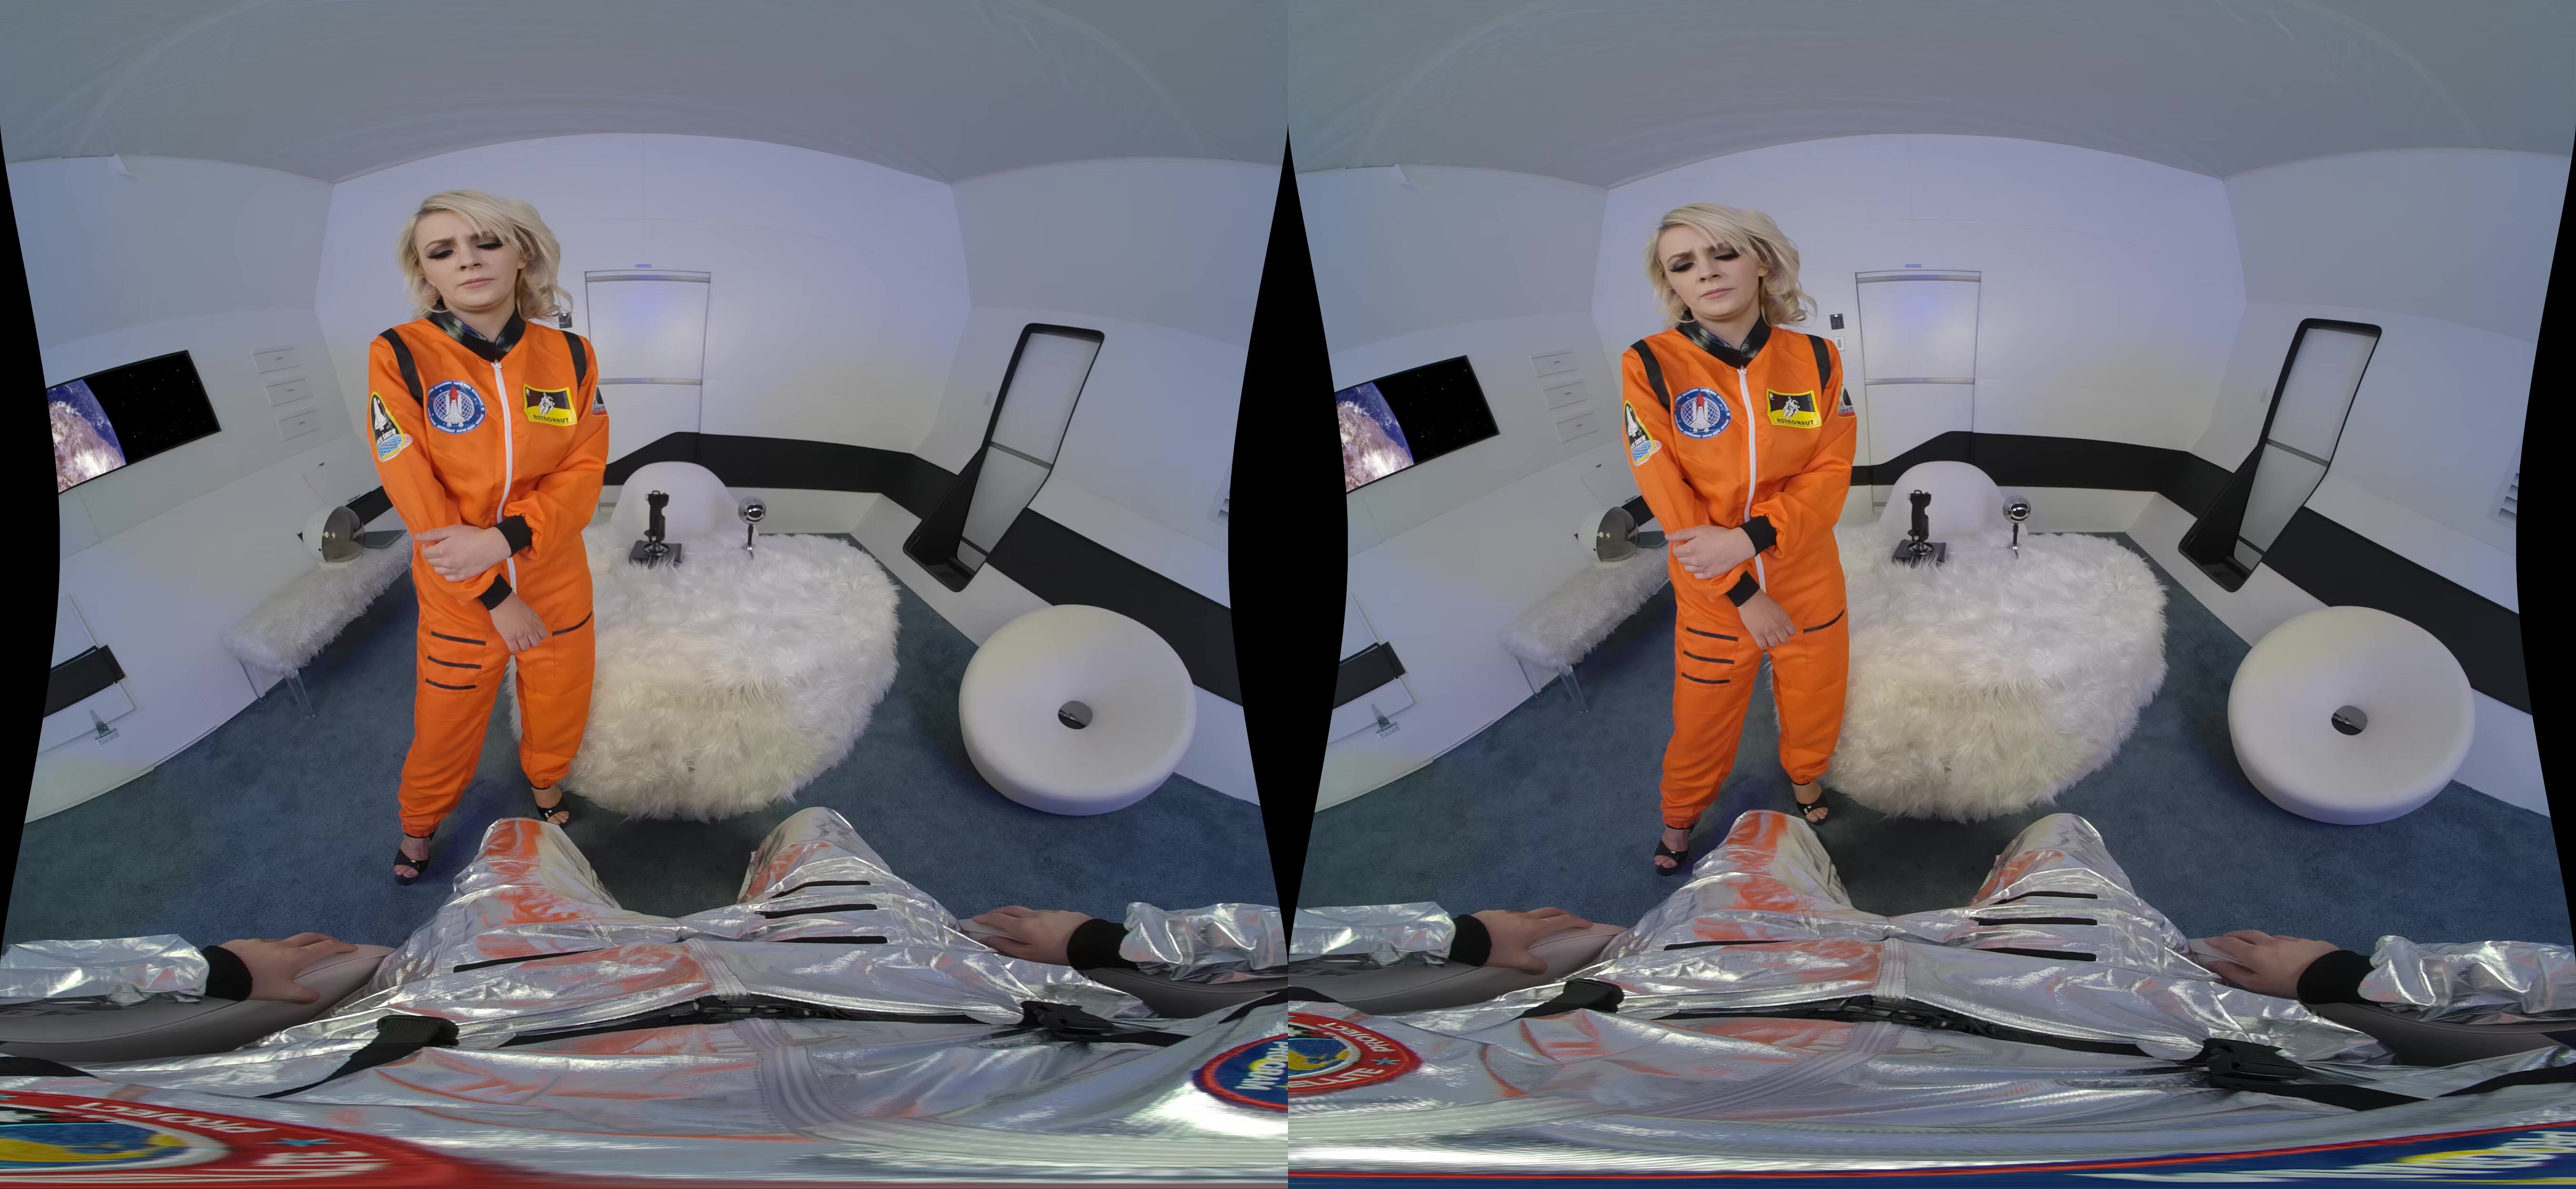 Ava Sinclaire - Lust In Space